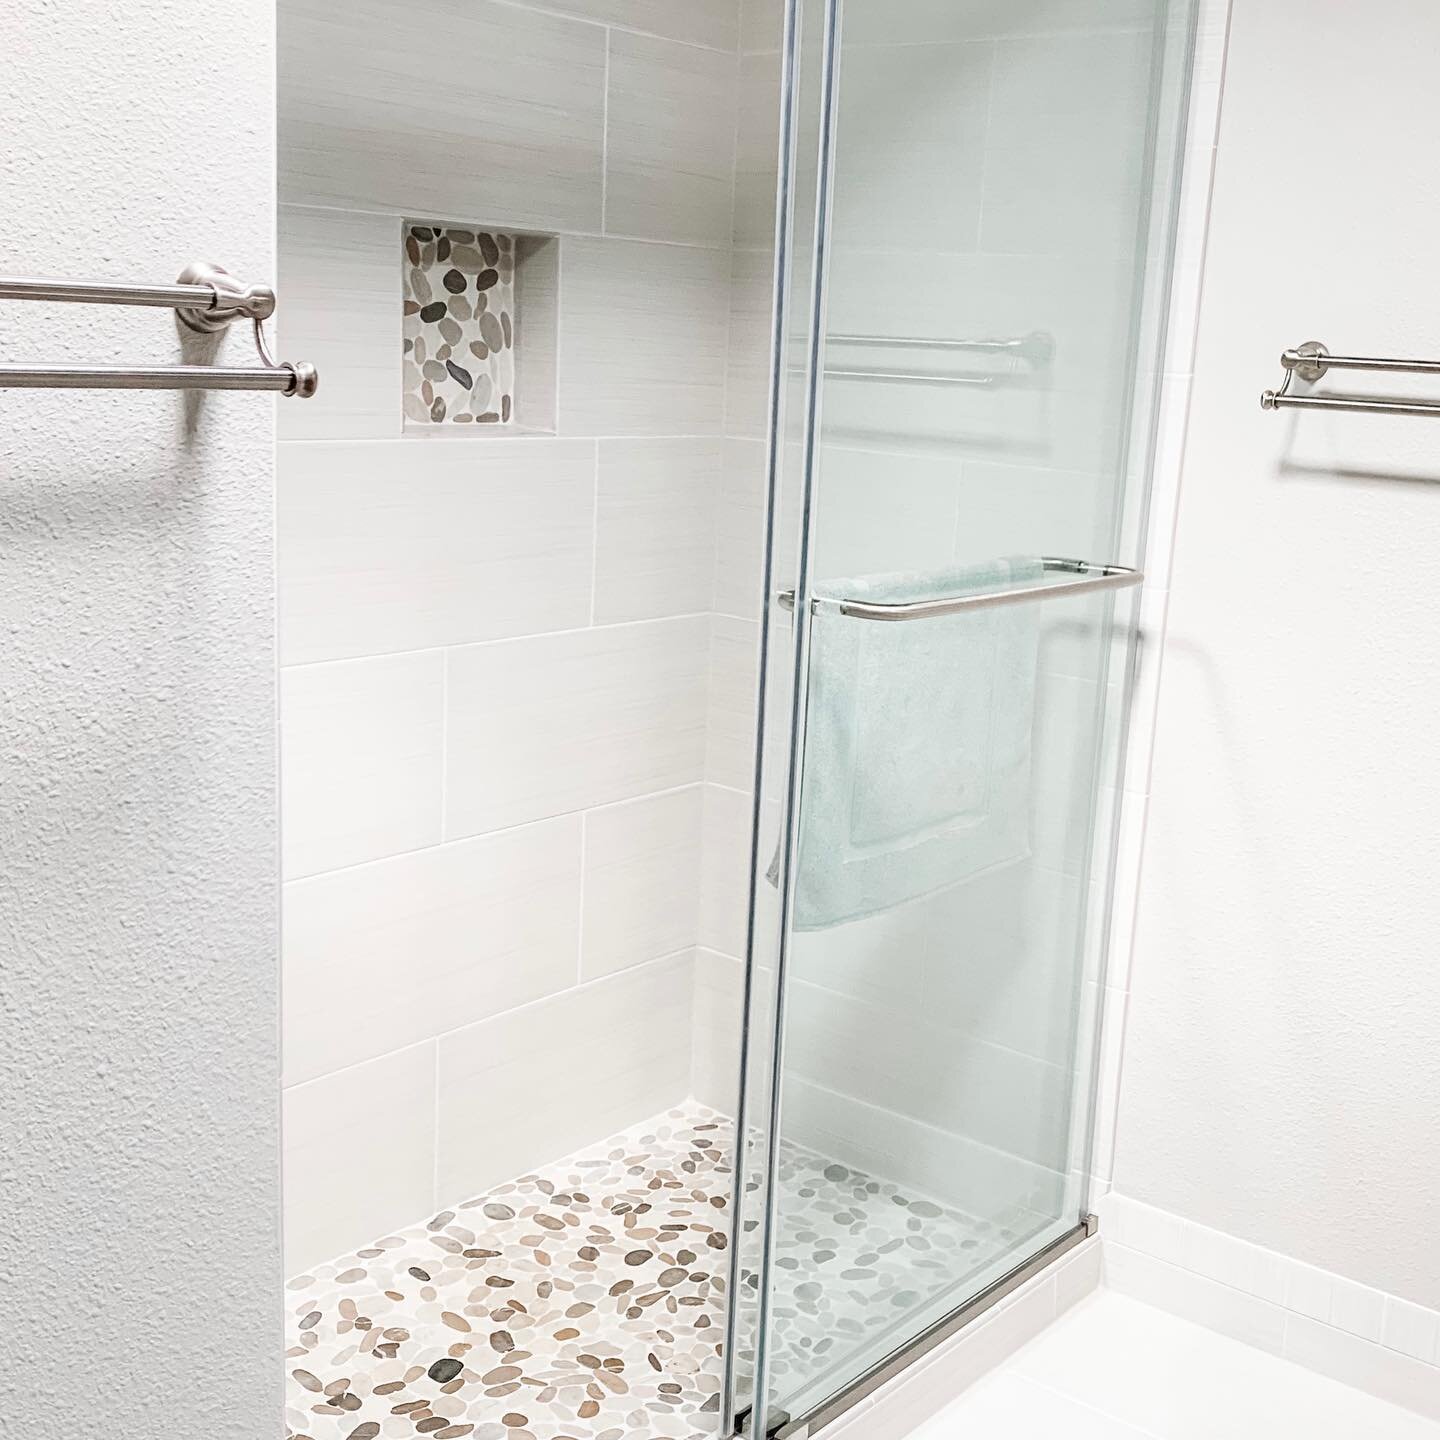 Wrapping up this sweet simple bathroom in Cedar Hills and loving the clean white and grey paired with stone accent in the shower. 
.
.
.
.
.
.
.
.
.
#stonemosaic #stonemosaictile #whitebathroom #showerniche #greyquartz #greycountertops #stainlessstee